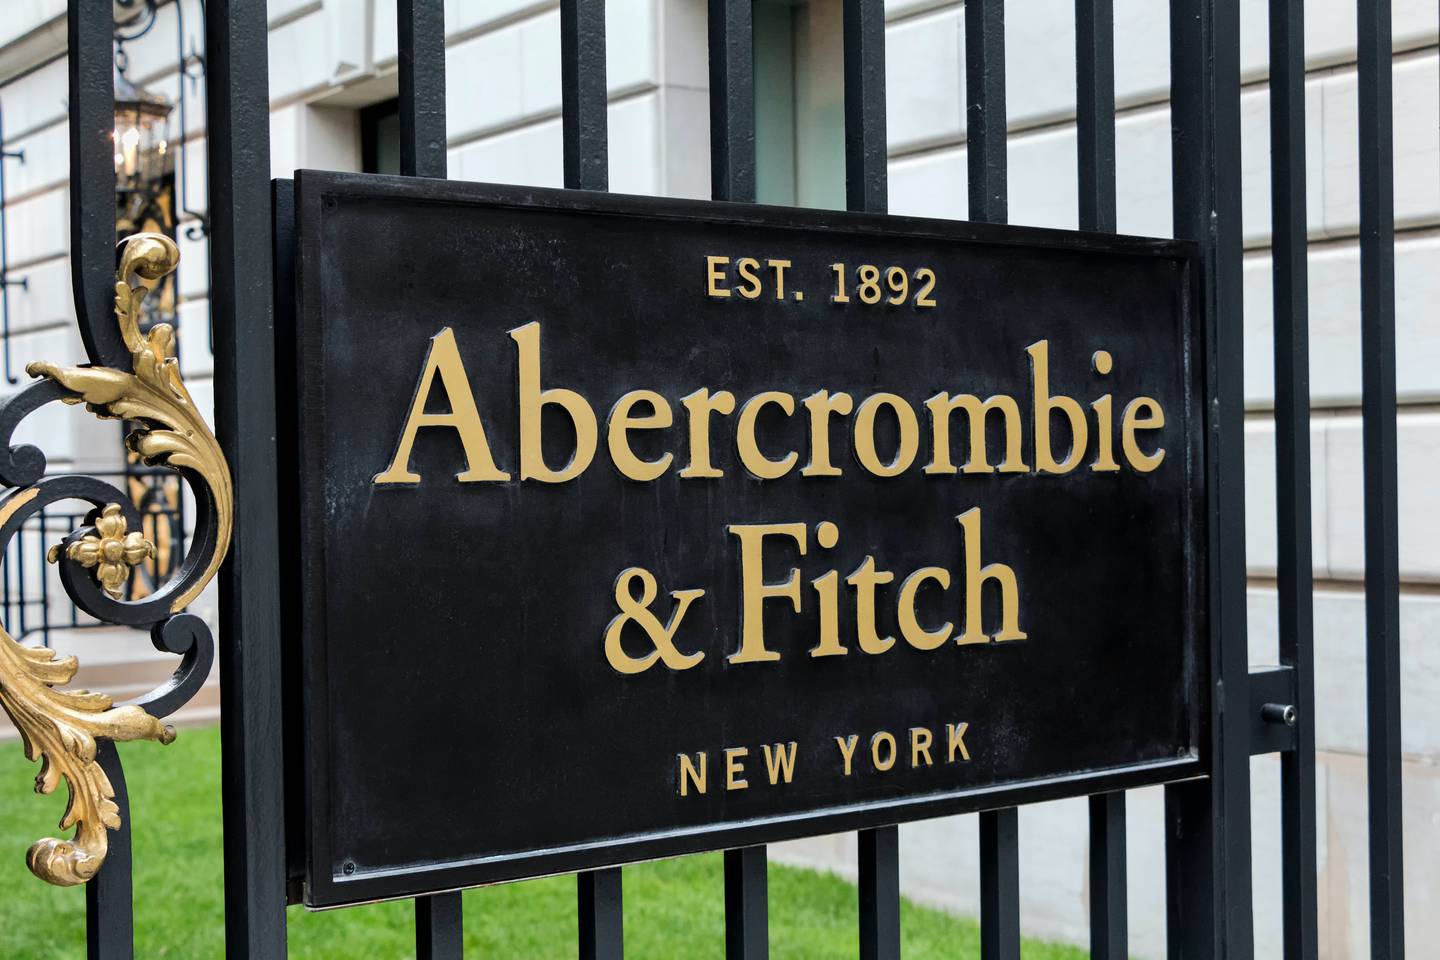 Abercrombie & Fitch store.